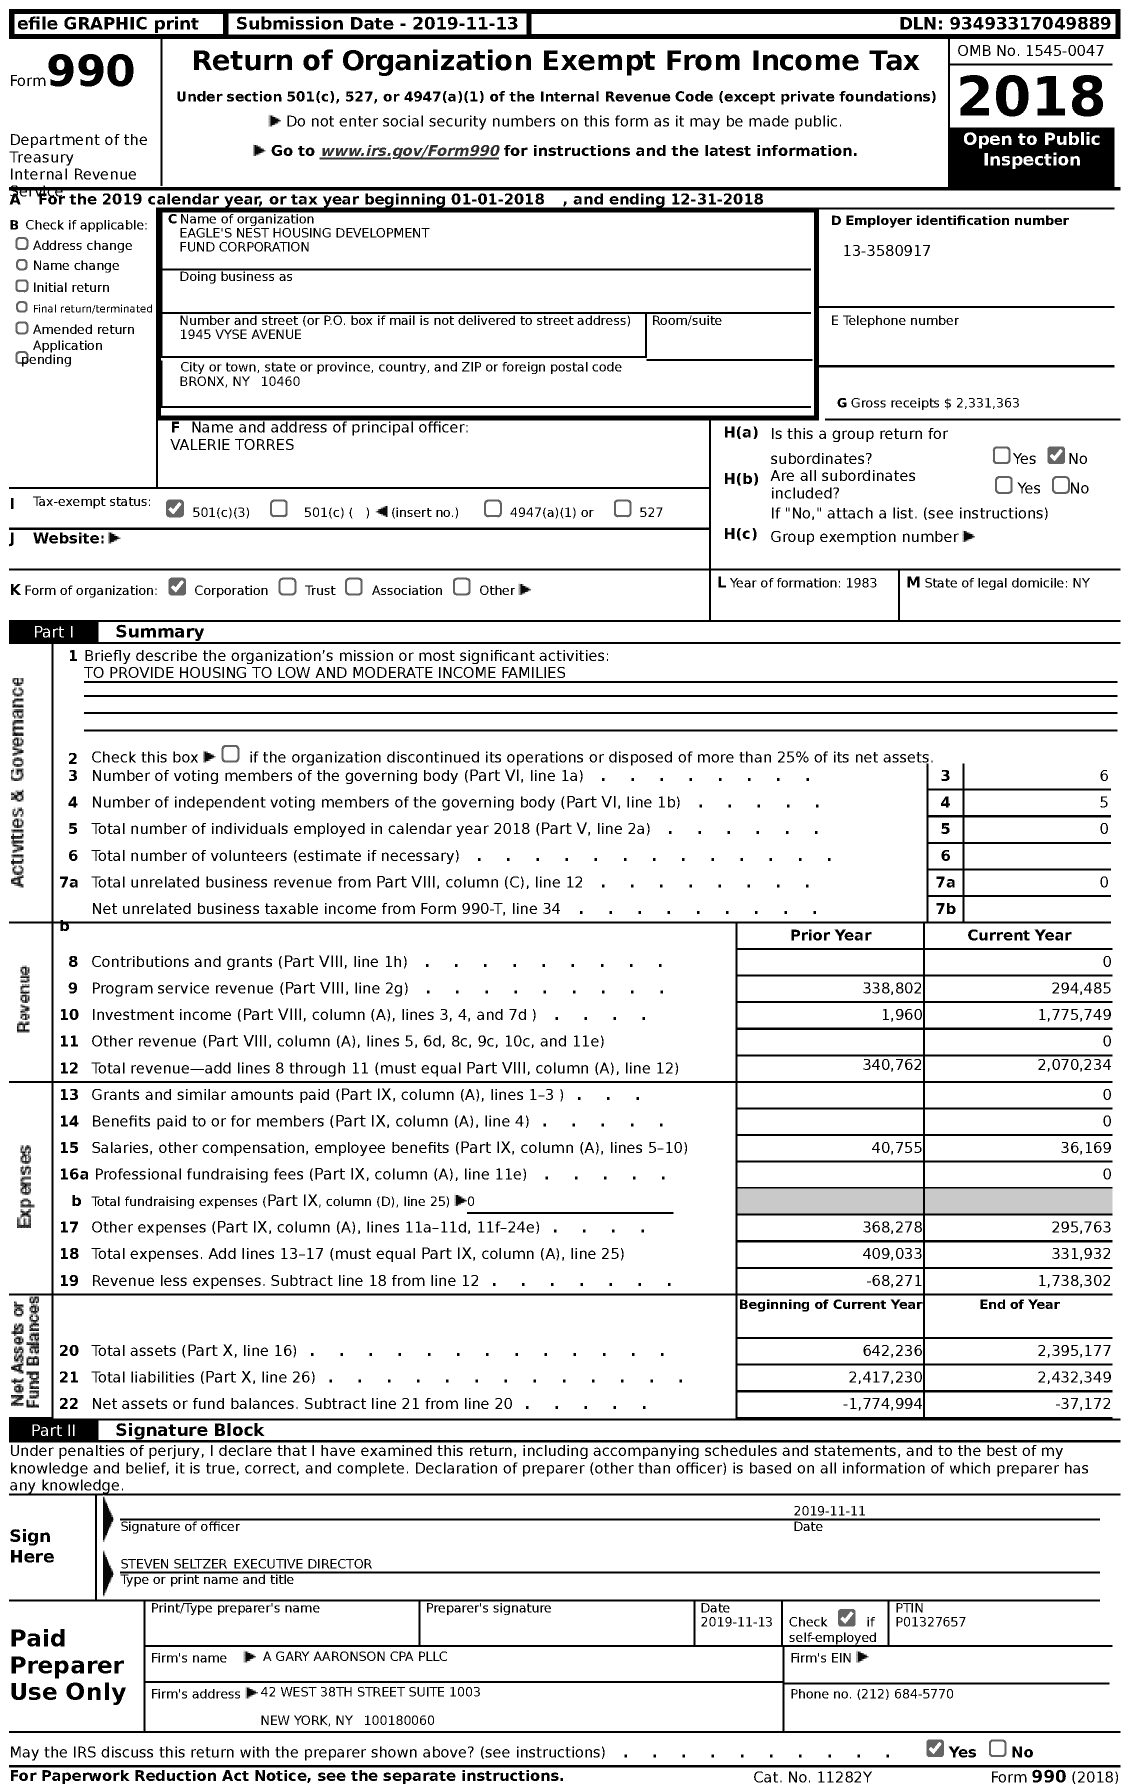 Image of first page of 2018 Form 990 for Eagle's Nest Housing Development Fund Corporation